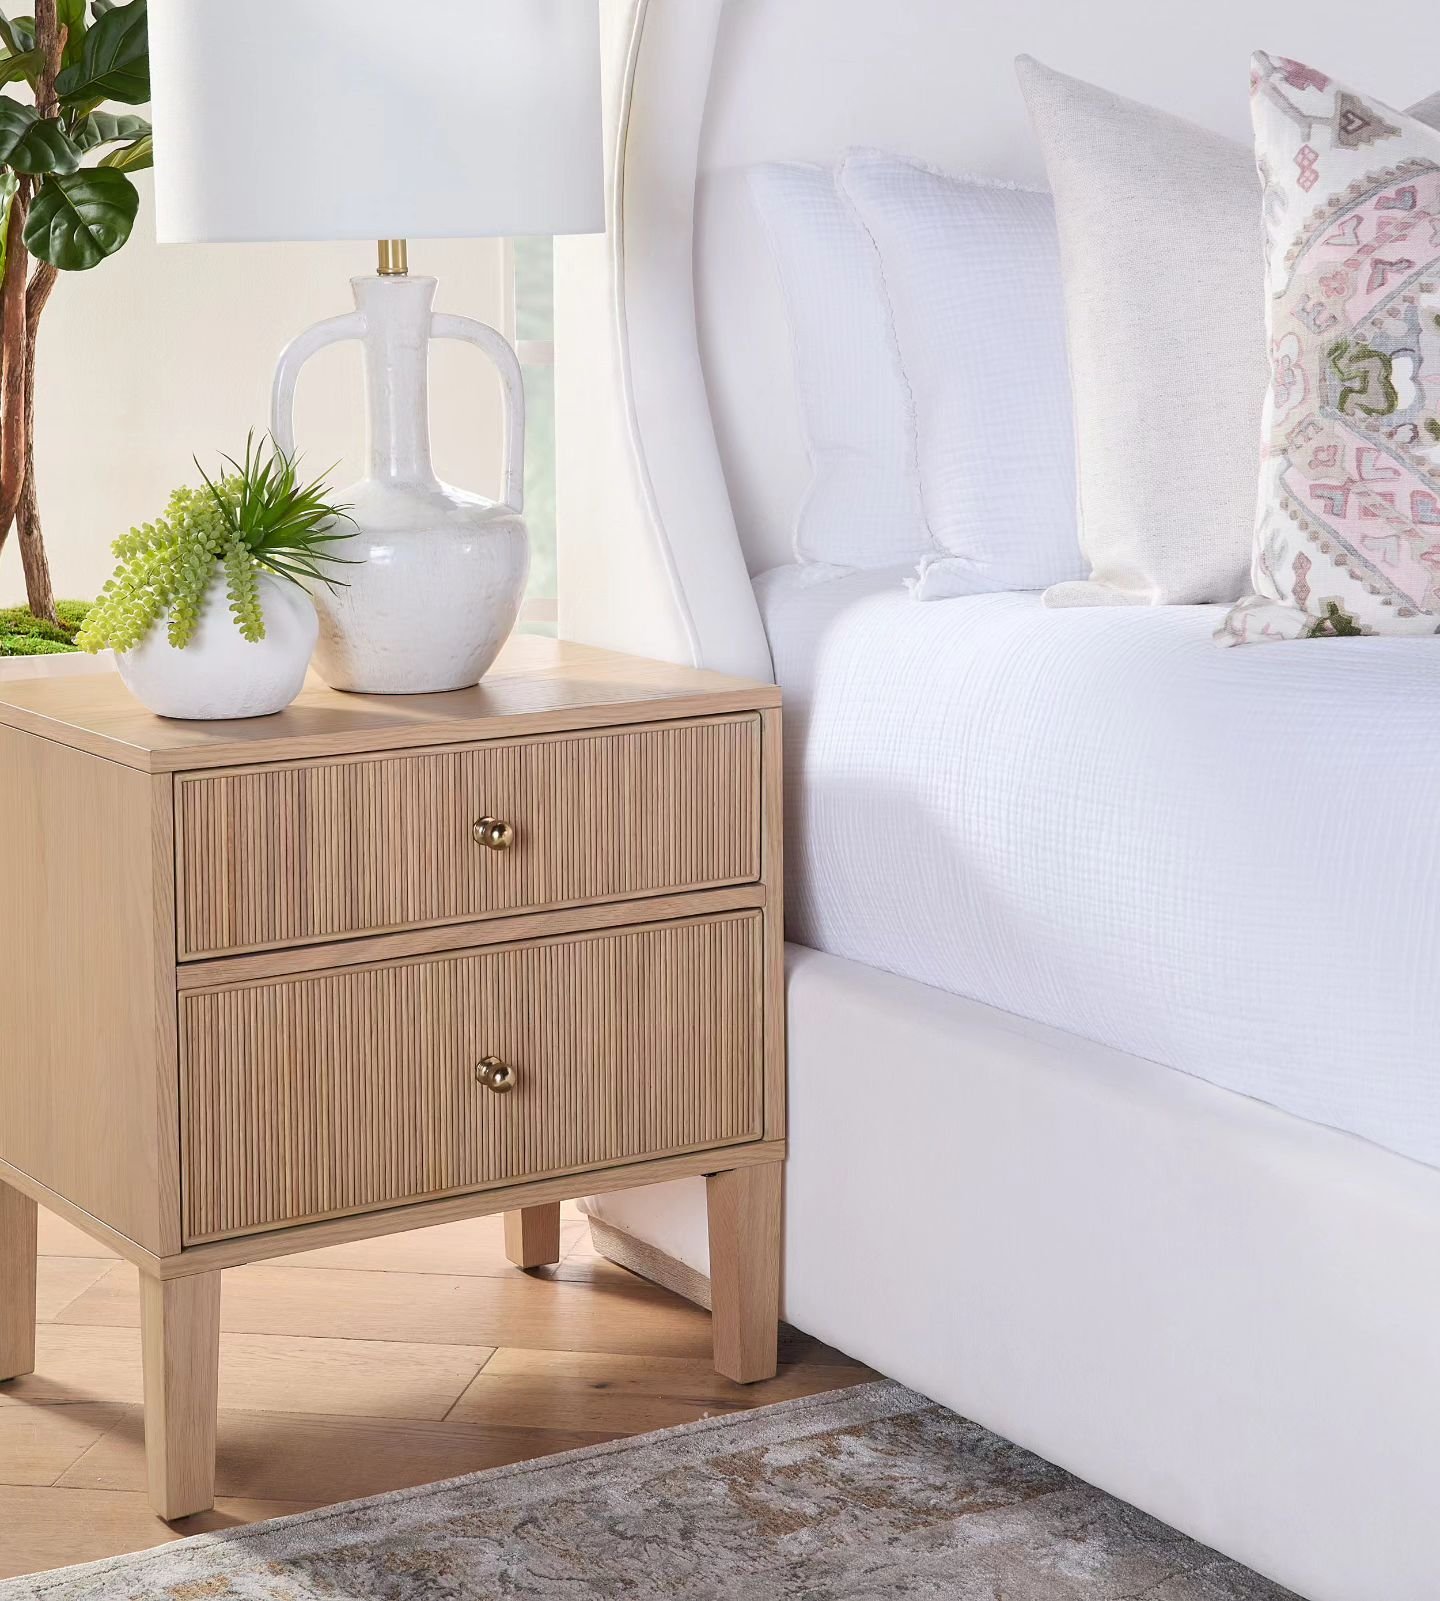 Introducing Highland Nightstand from Essentials For Living's newest collection, Bronze Bay. Featuring stunning fluted wood drawerfronts and solid iron knobs.